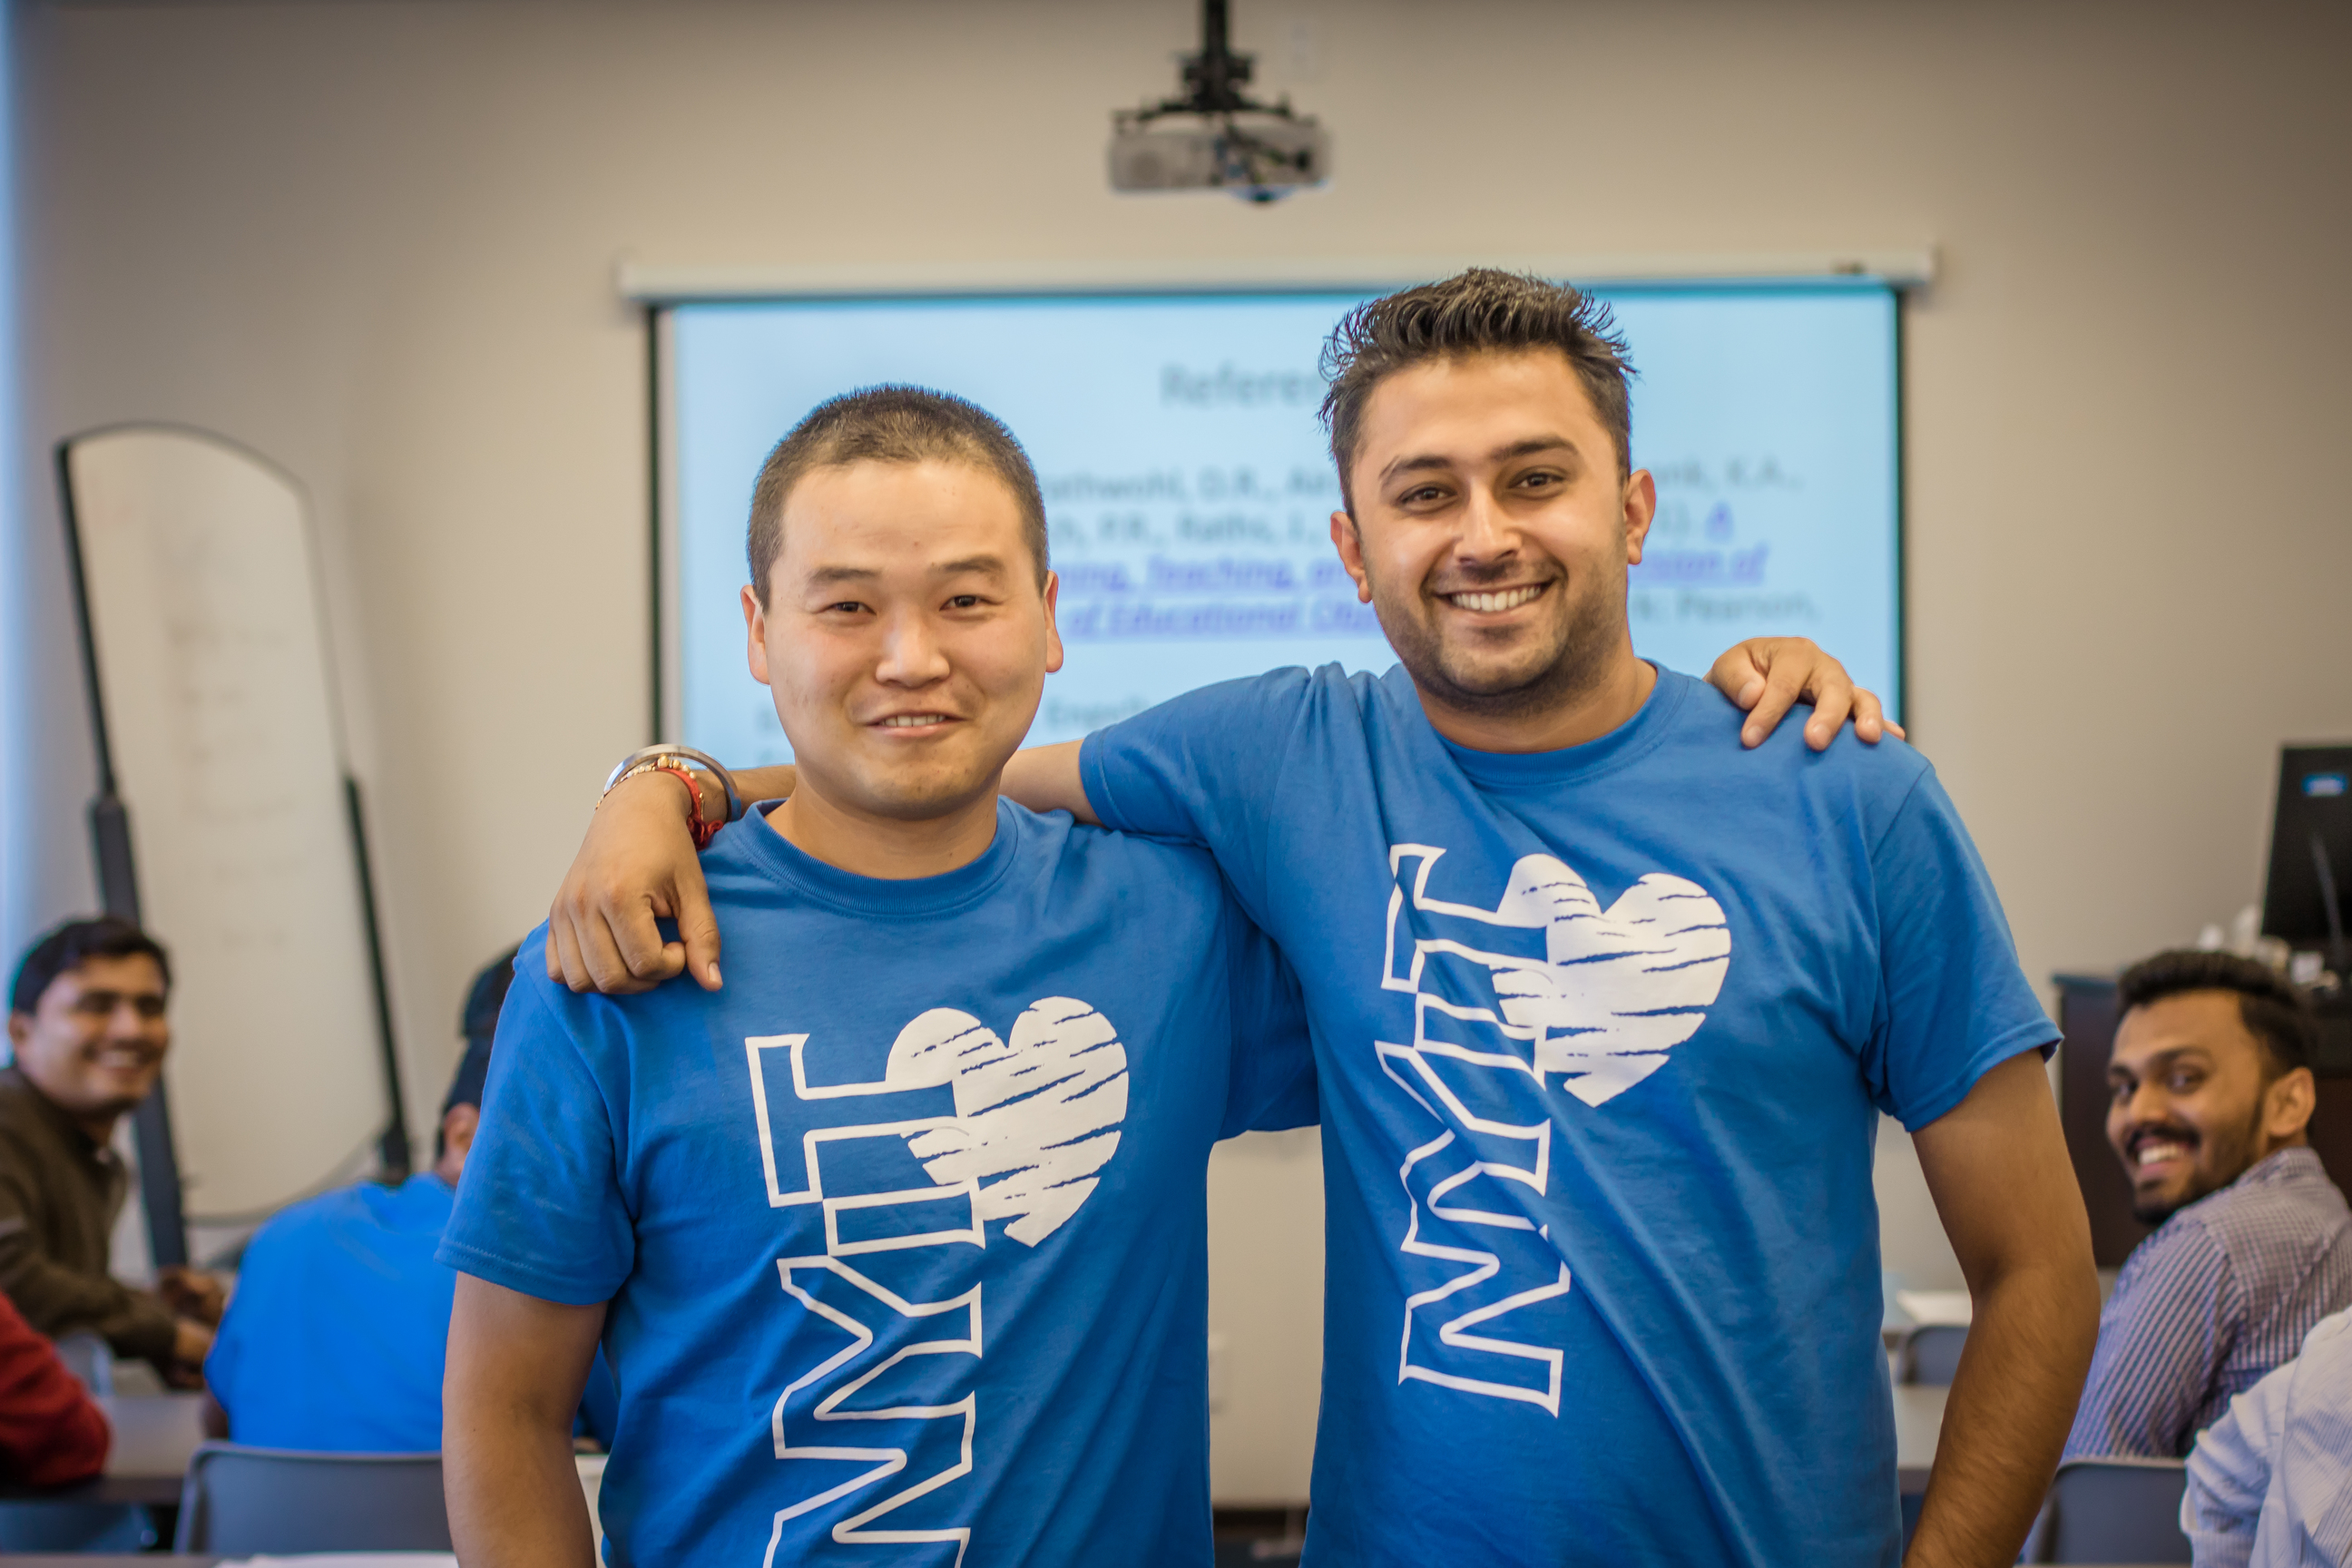 New Energy Management, M.S. students in blue NYIT t-shirts